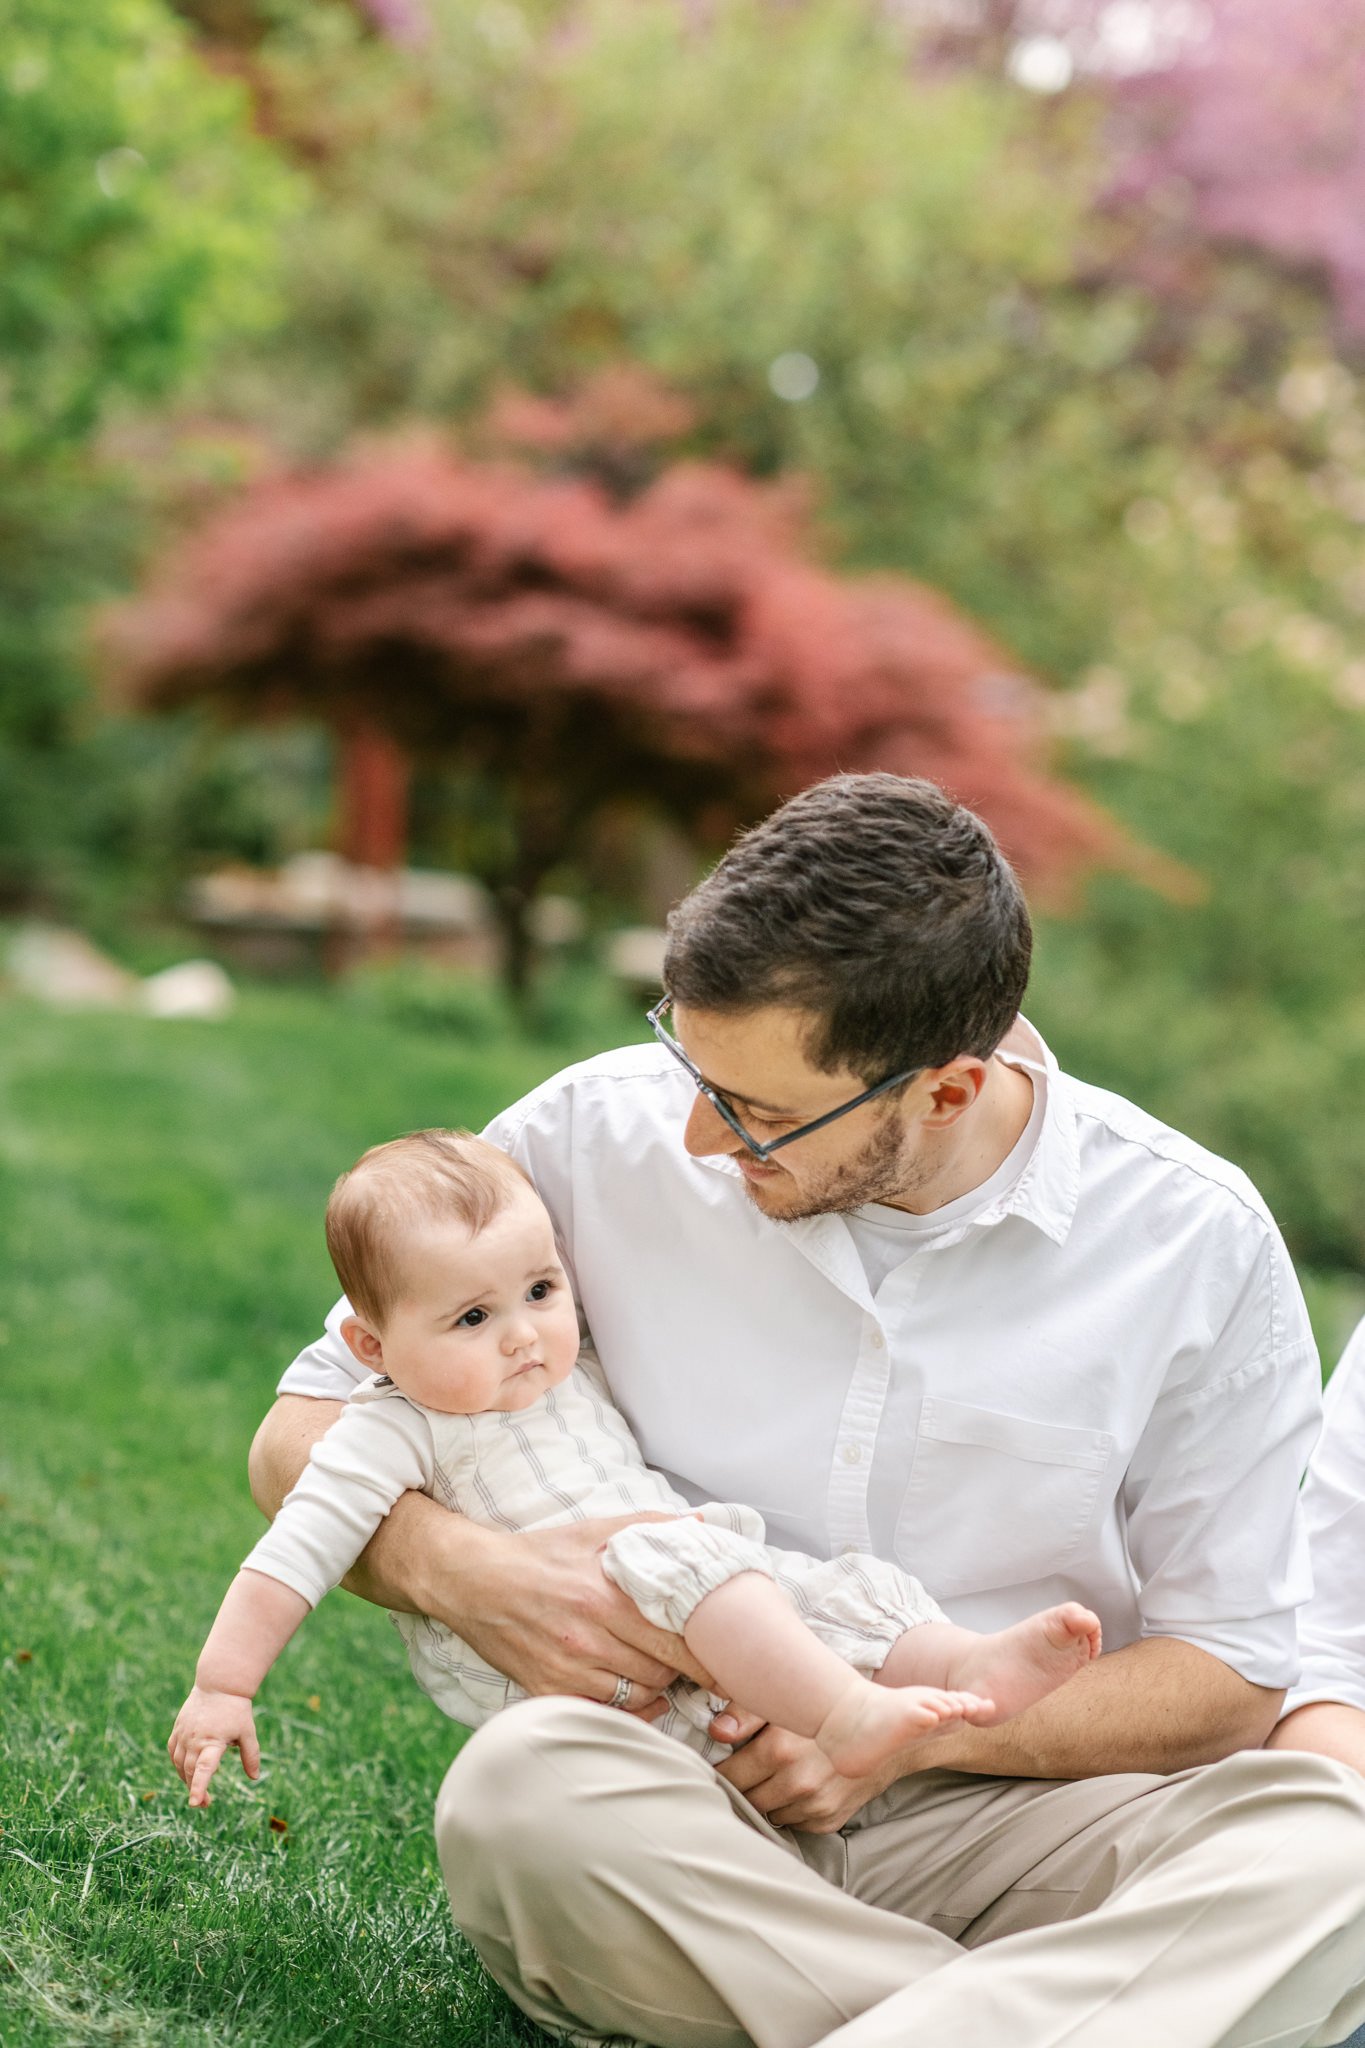  Sitting in his yard in South Orange, NJ a father smiles at his little girl by Nicole Hawkins Photography. yard portraits daddy photo #NicoleHawkinsPhotography #NicoleHawkinsfamilies #AtHomePortraits #EastCoastFamilyPhotographer #NewJerseyInHomePhoto